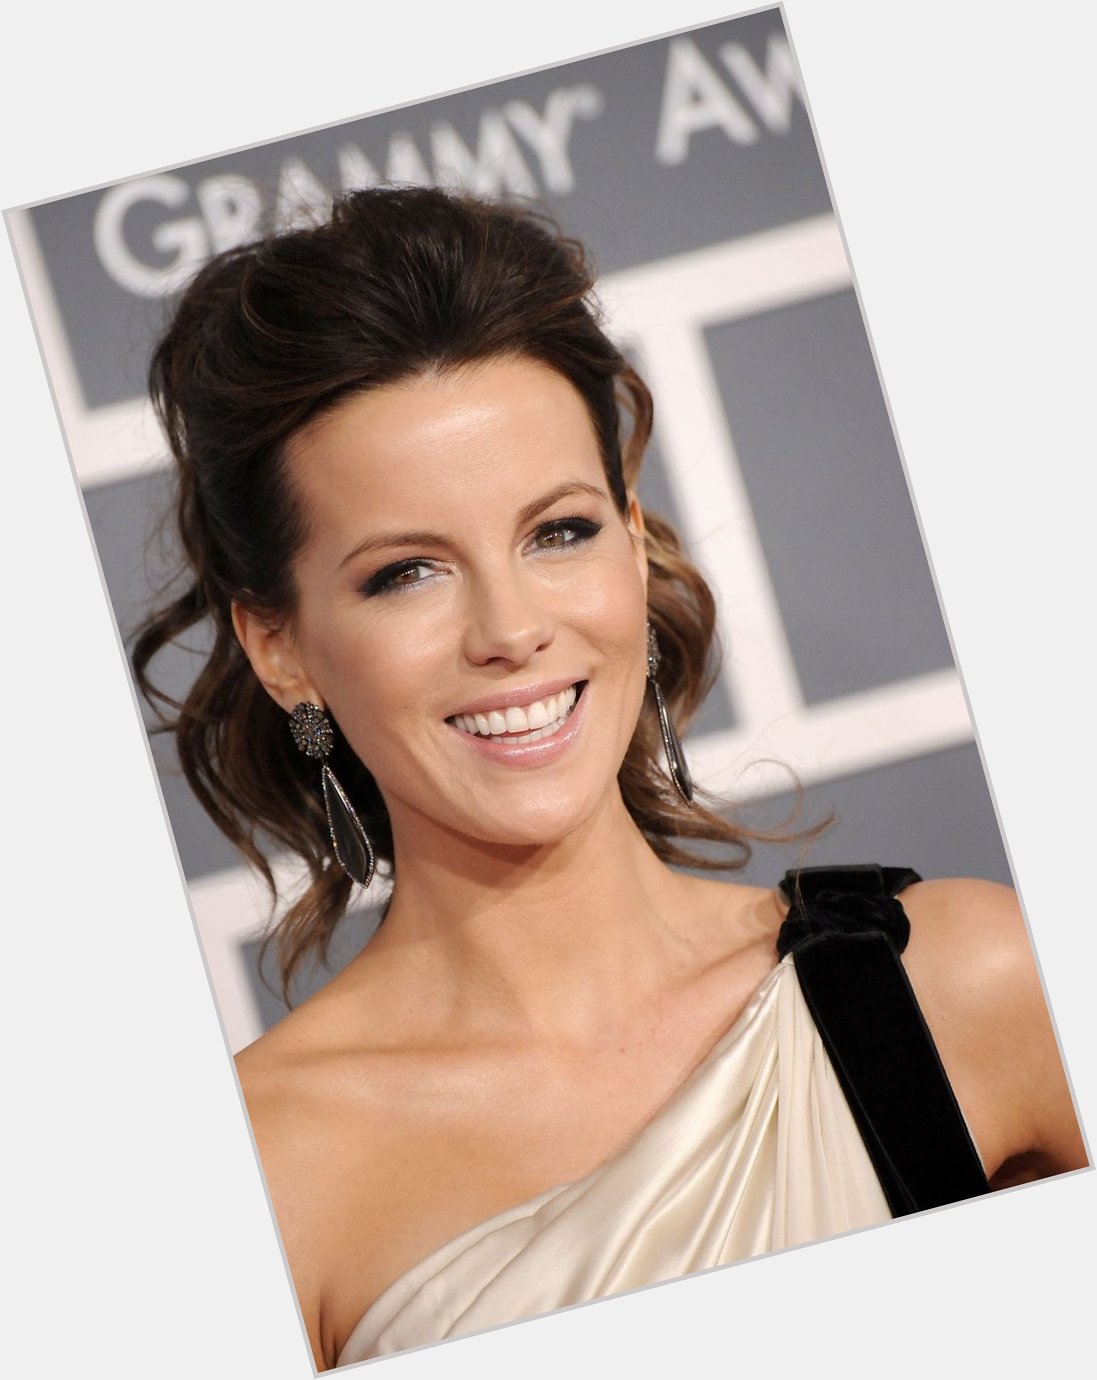 Happy Birthday to Kate Beckinsale who turns 46 today! 